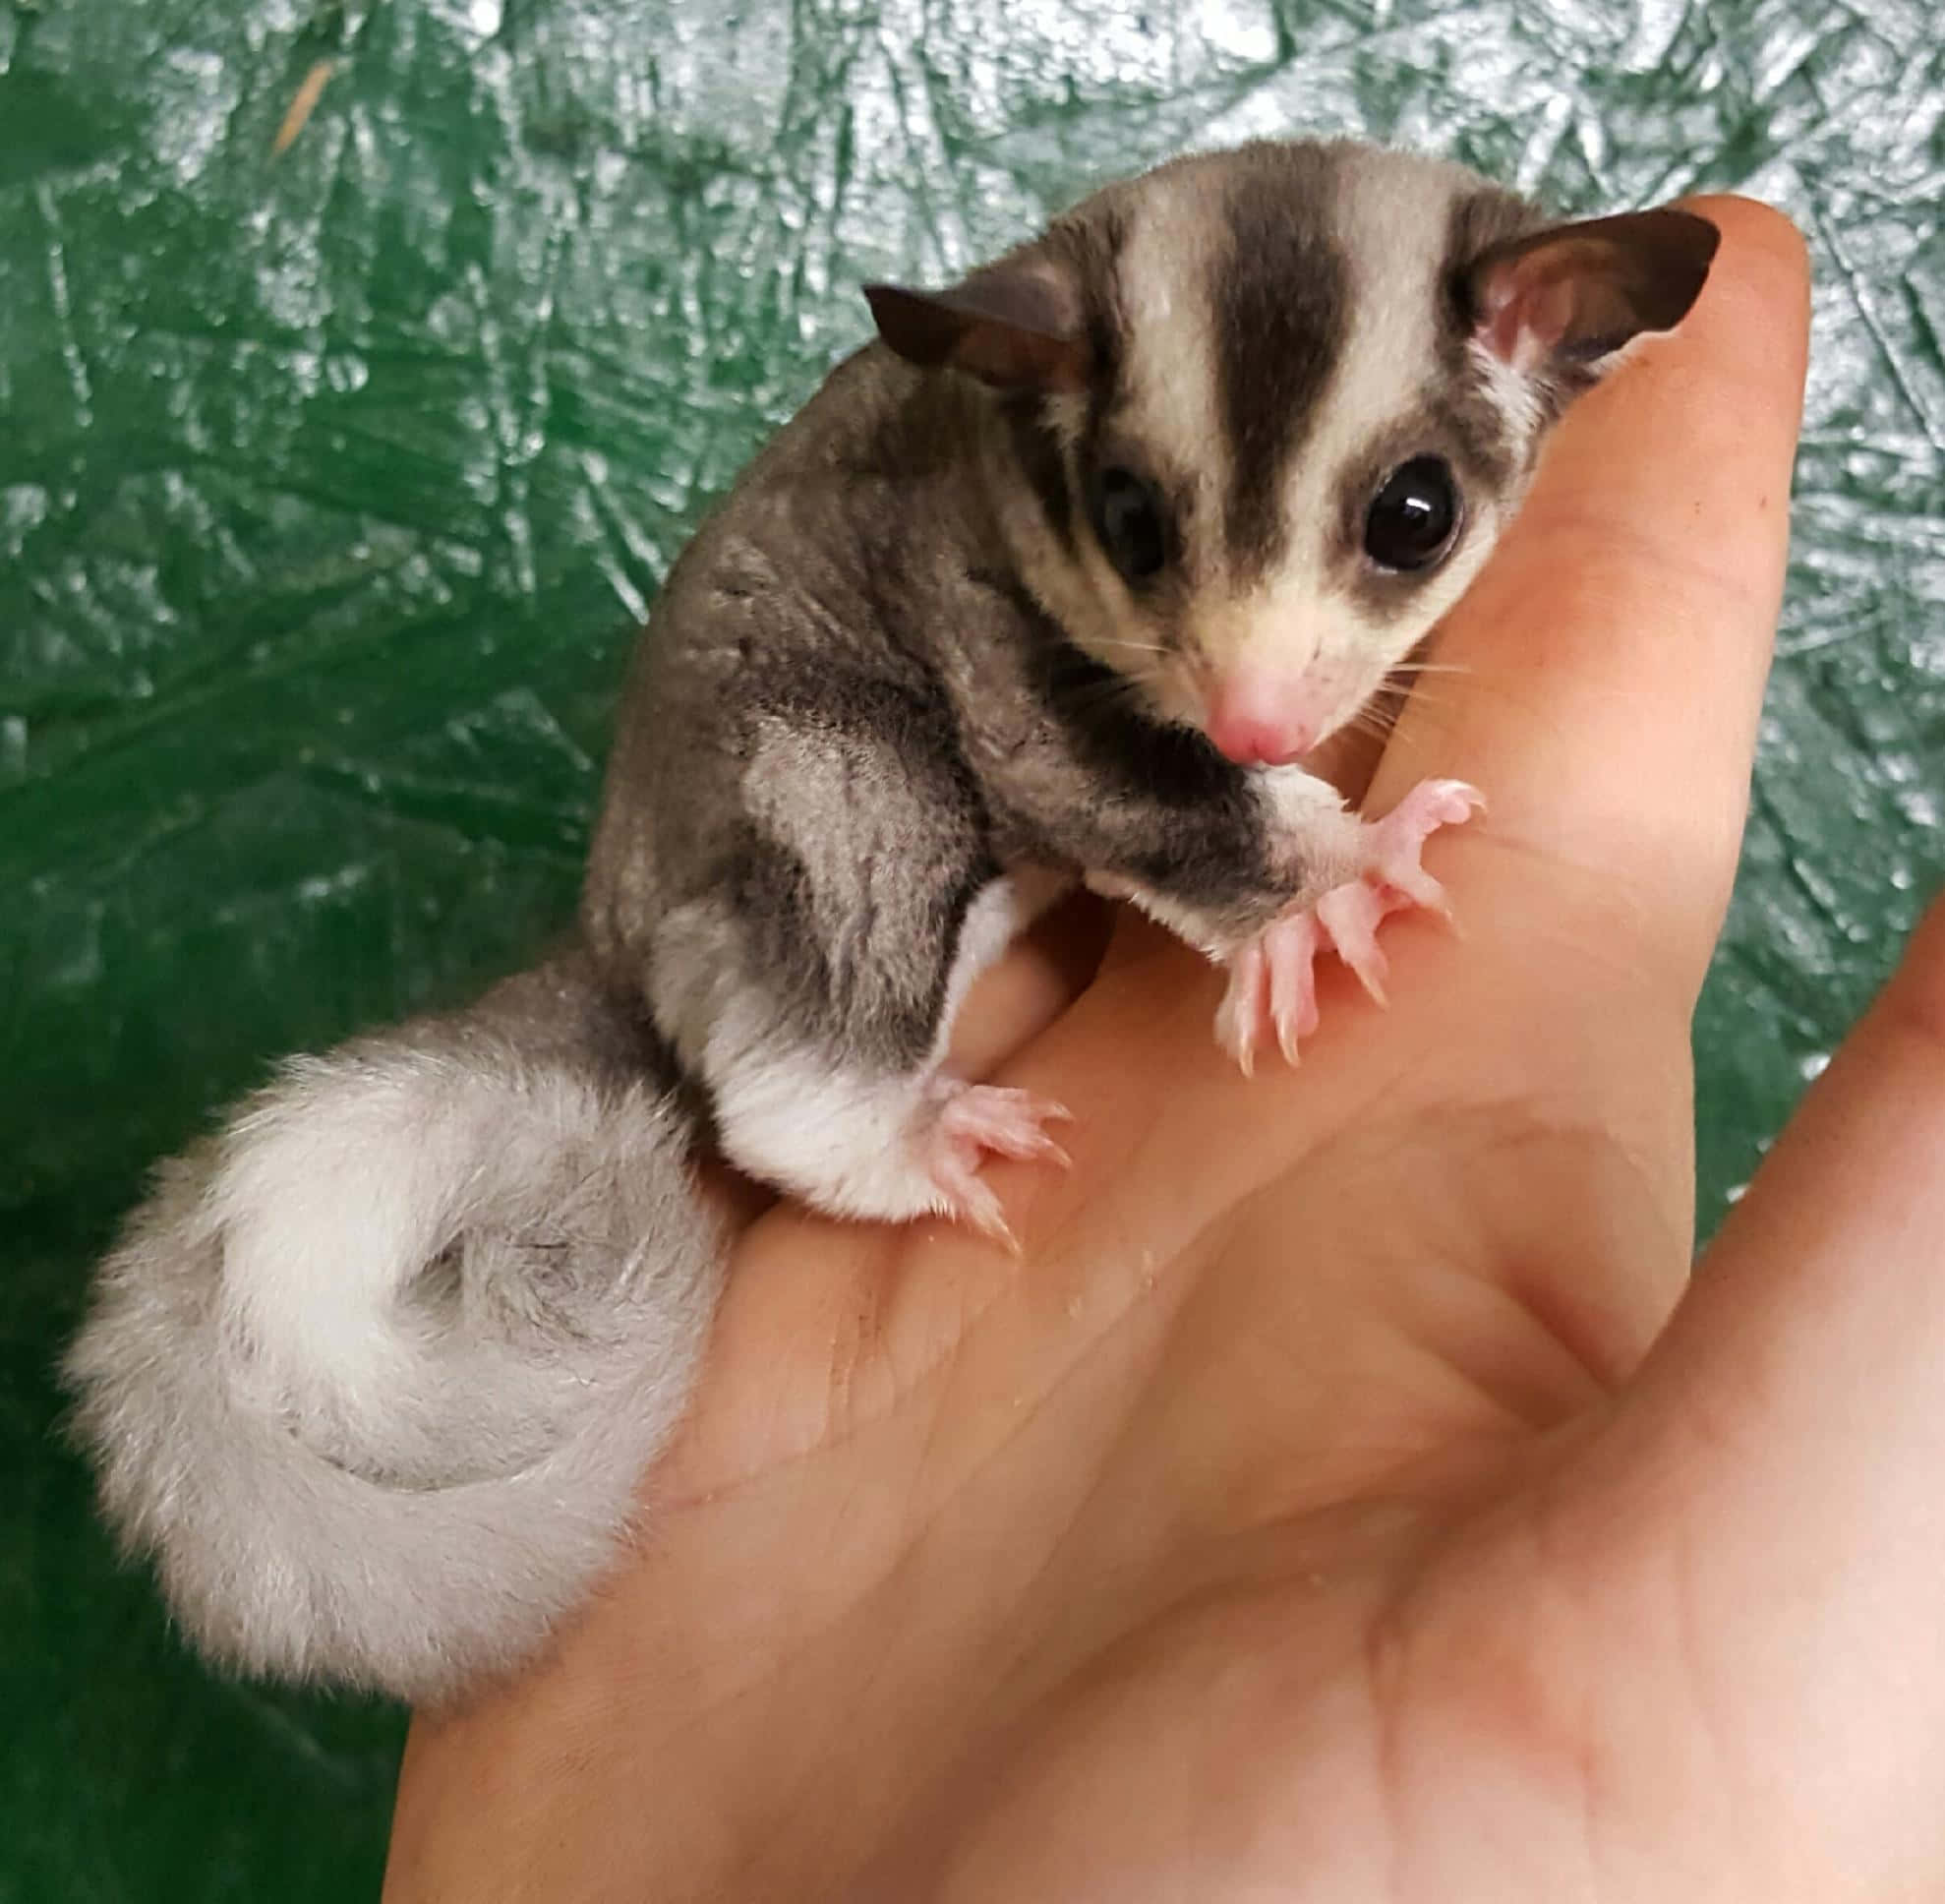 Explore the Wonders of Nature With a Sugar Glider